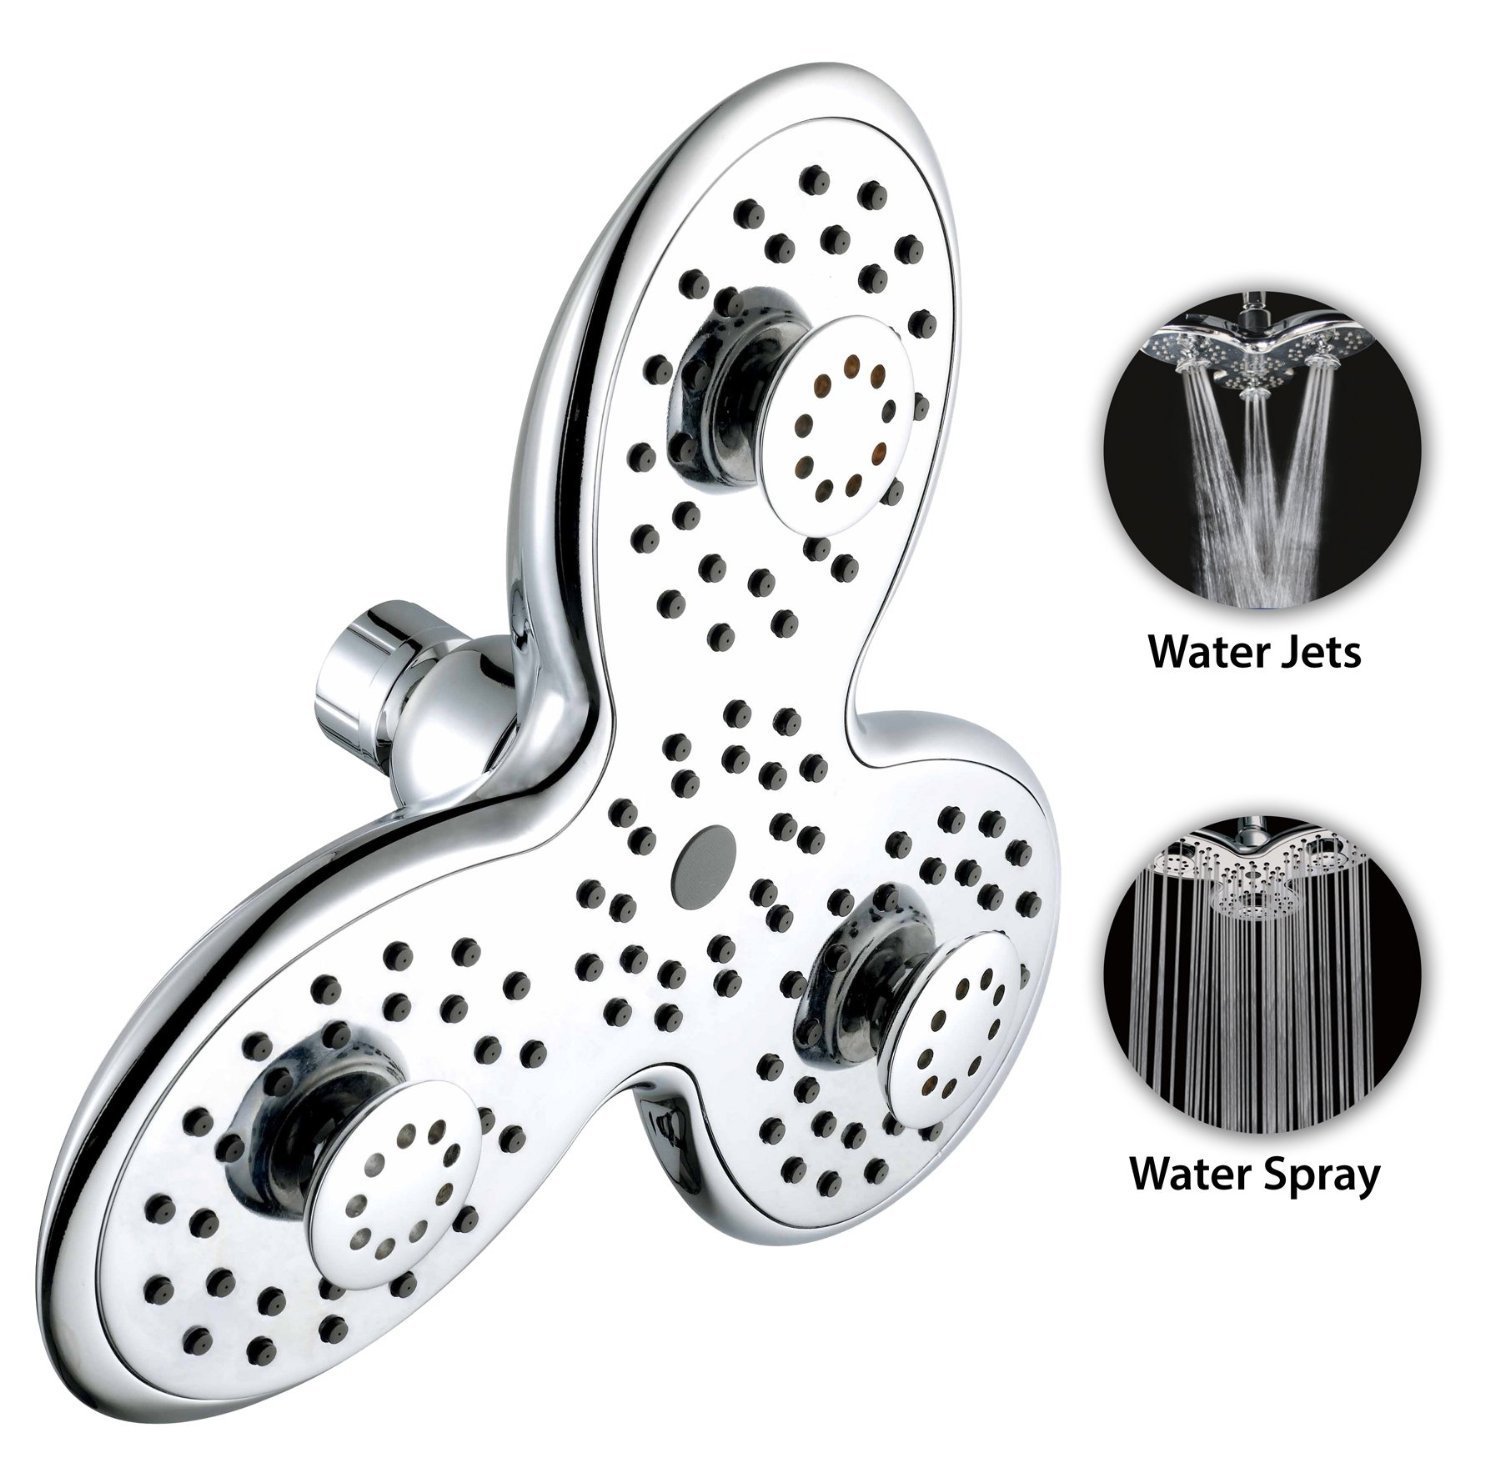 A-Flow™ Luxury Large 8 Showerhead with 3 Powerful Multi-Directional Massaging Water Jets